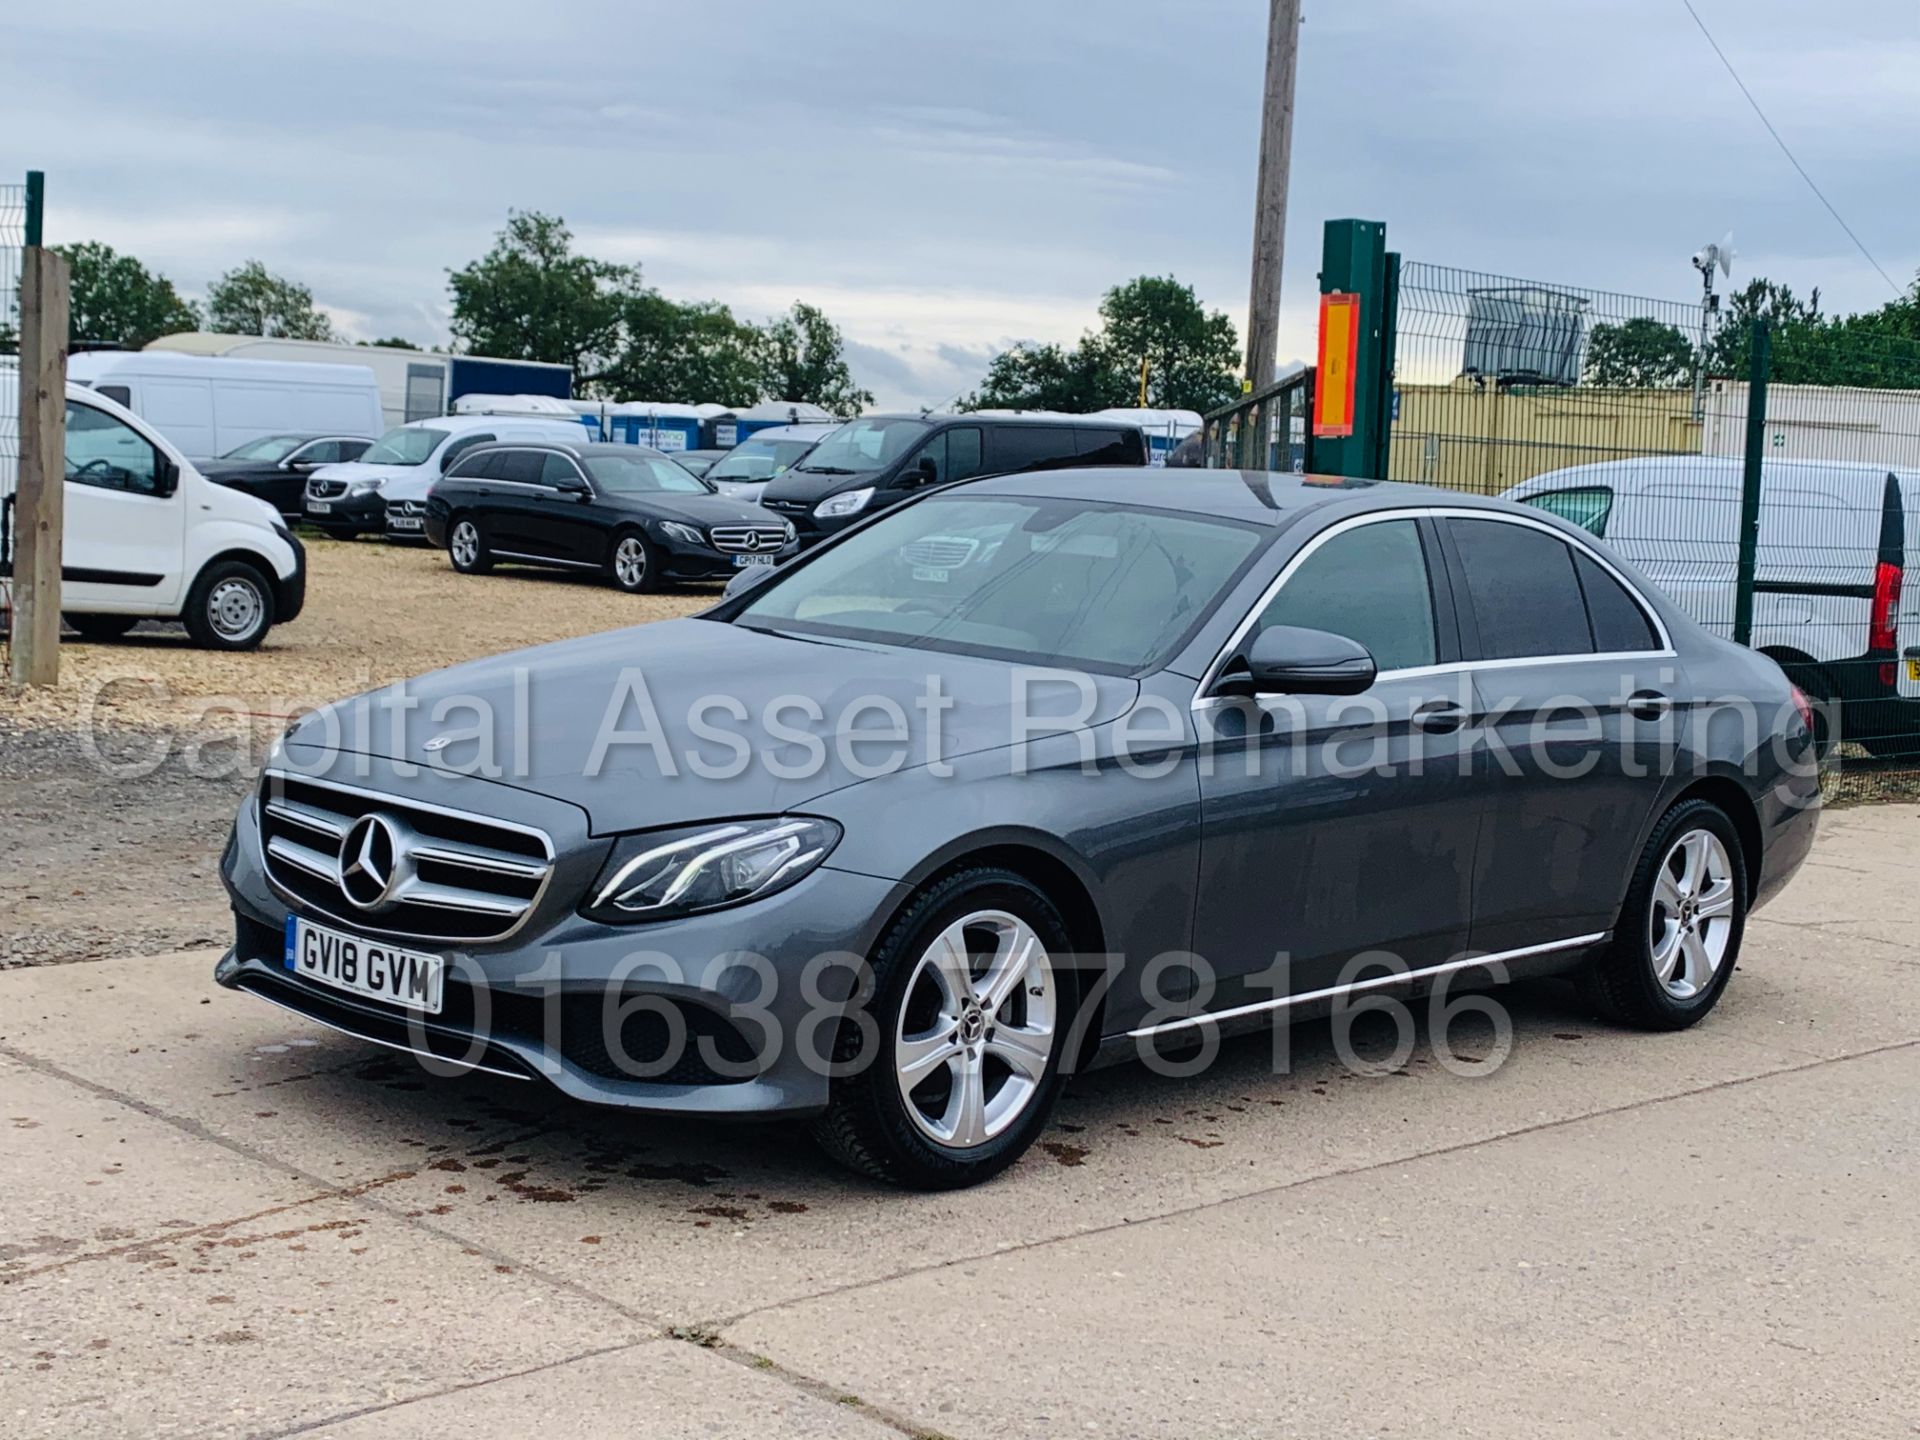 MERCEDES-BENZ E220D *SALOON* (2018 - NEW MODEL) '9-G TRONIC AUTO - LEATHER - SAT NAV' - Image 6 of 53